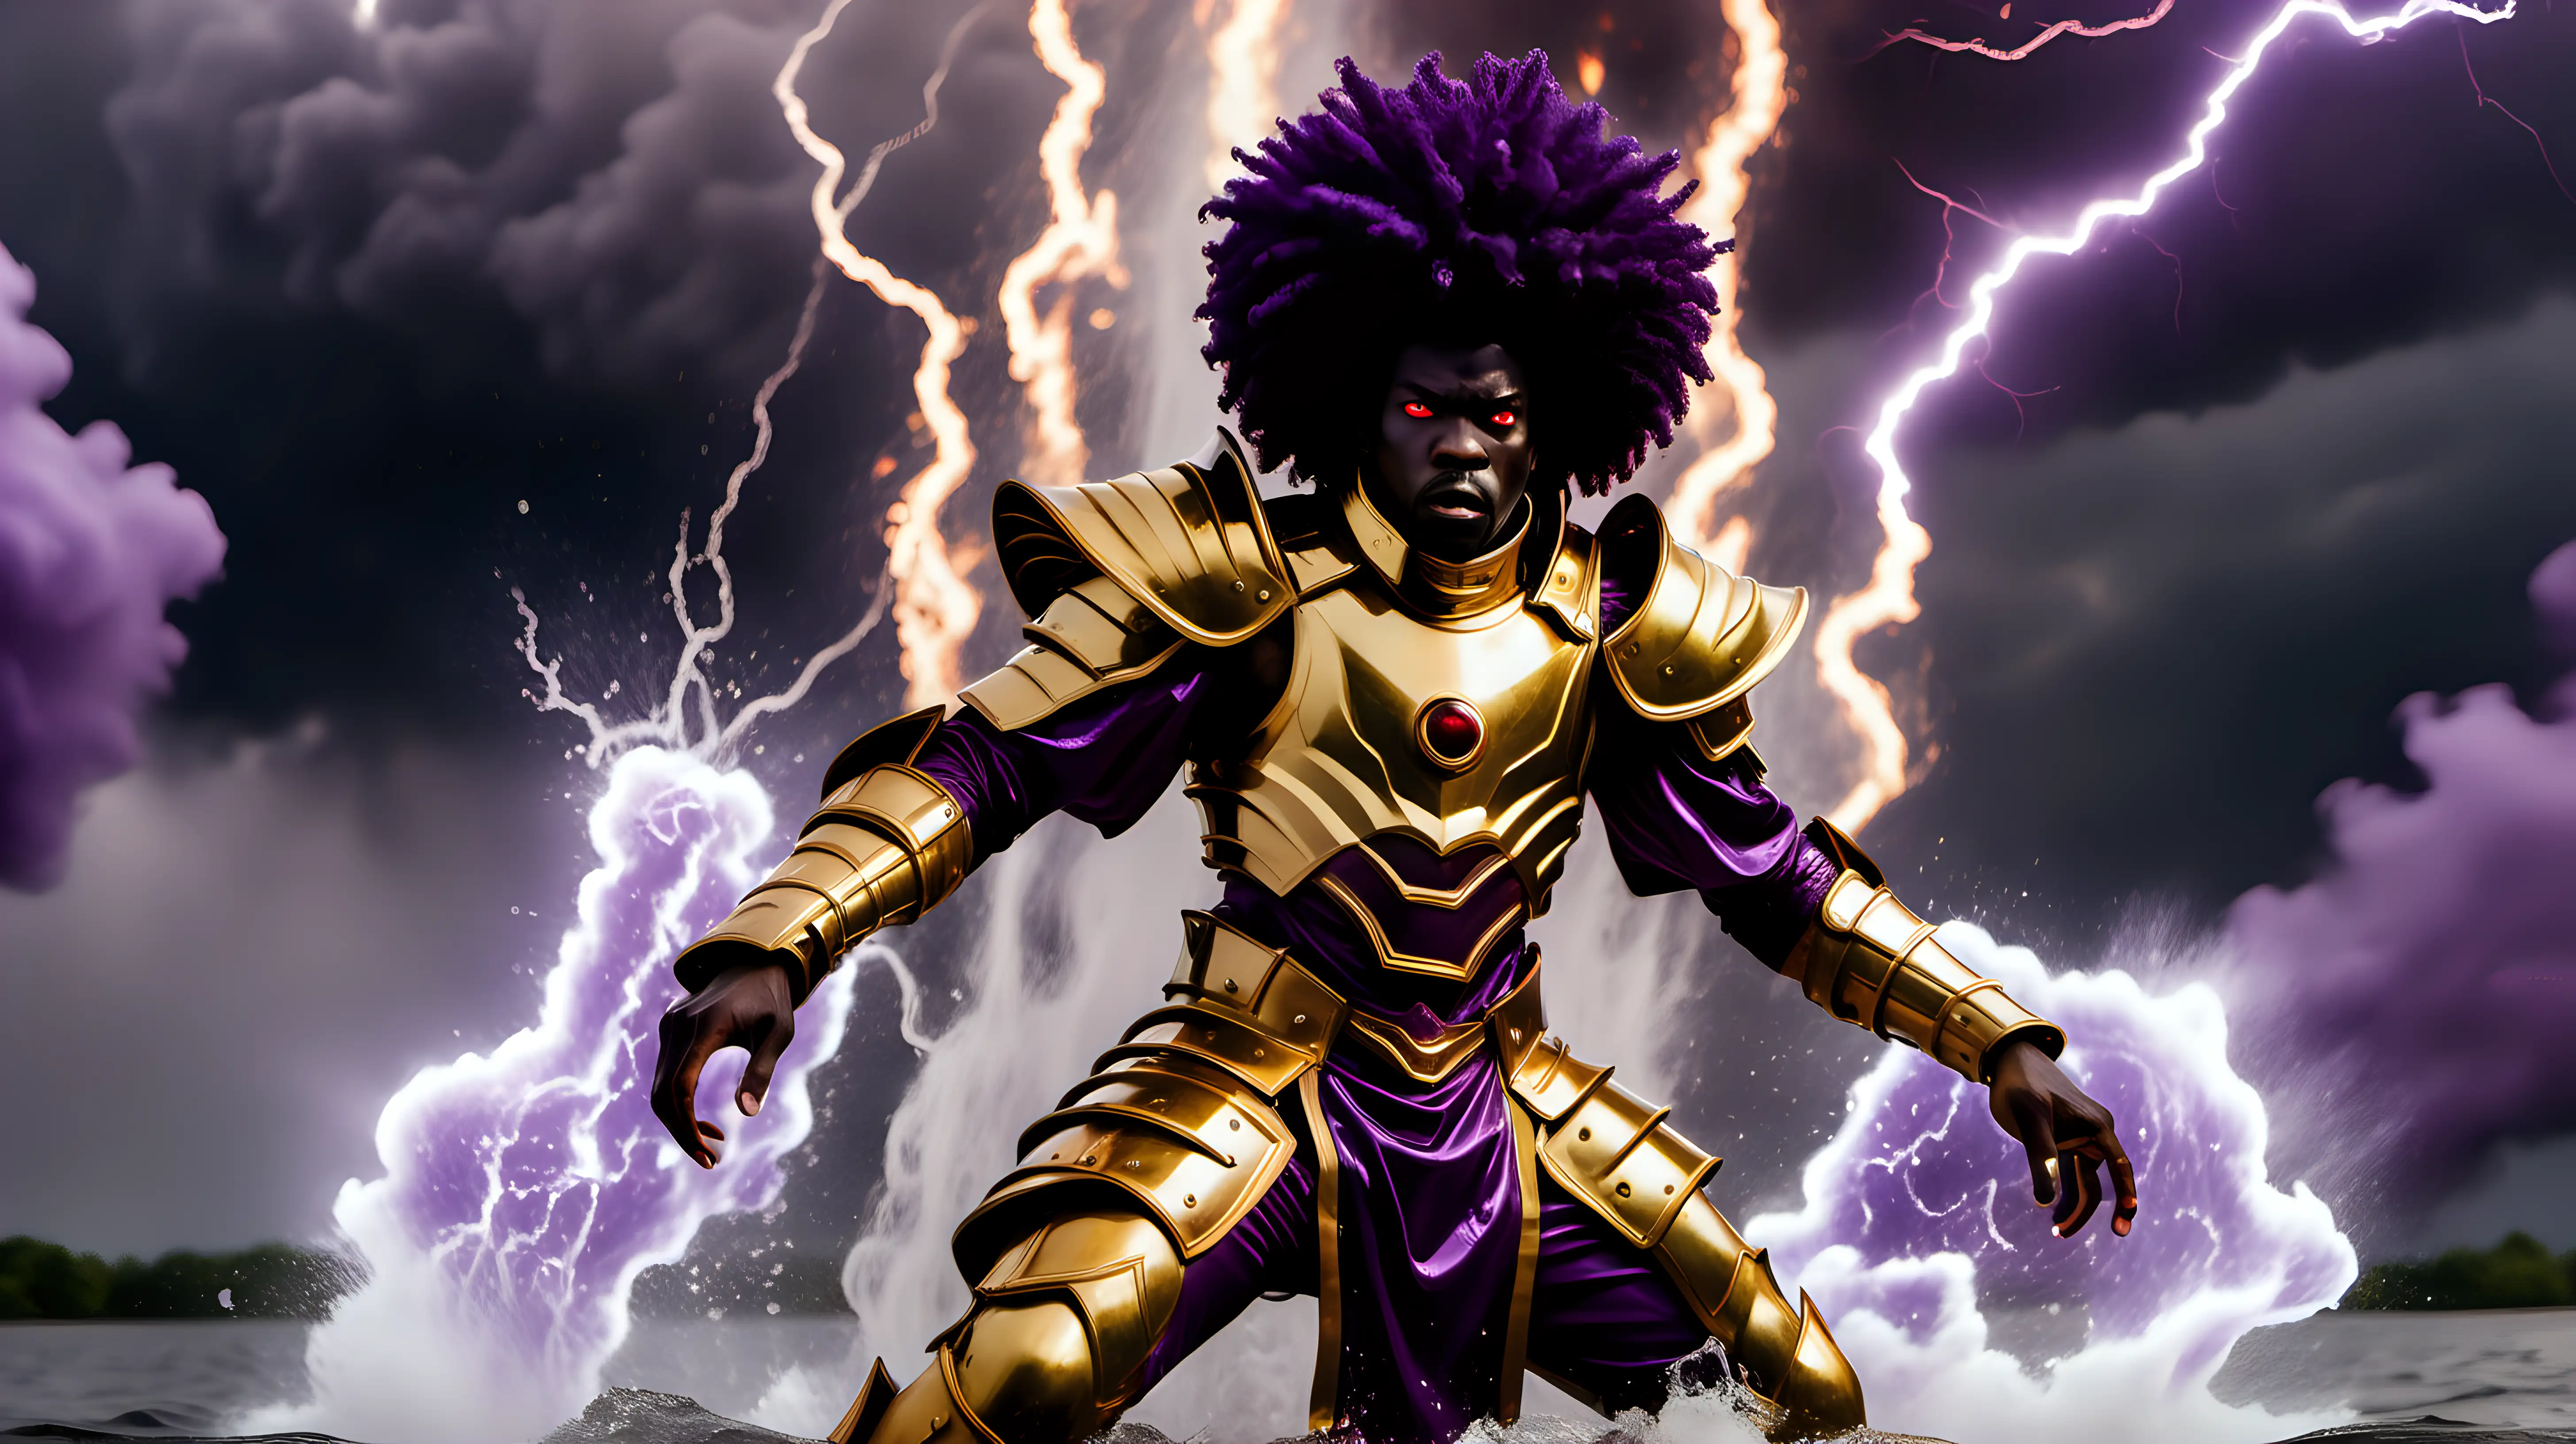 Powerful Black Man in Purple and Gold Battle Armor Manipulating Fire and Water